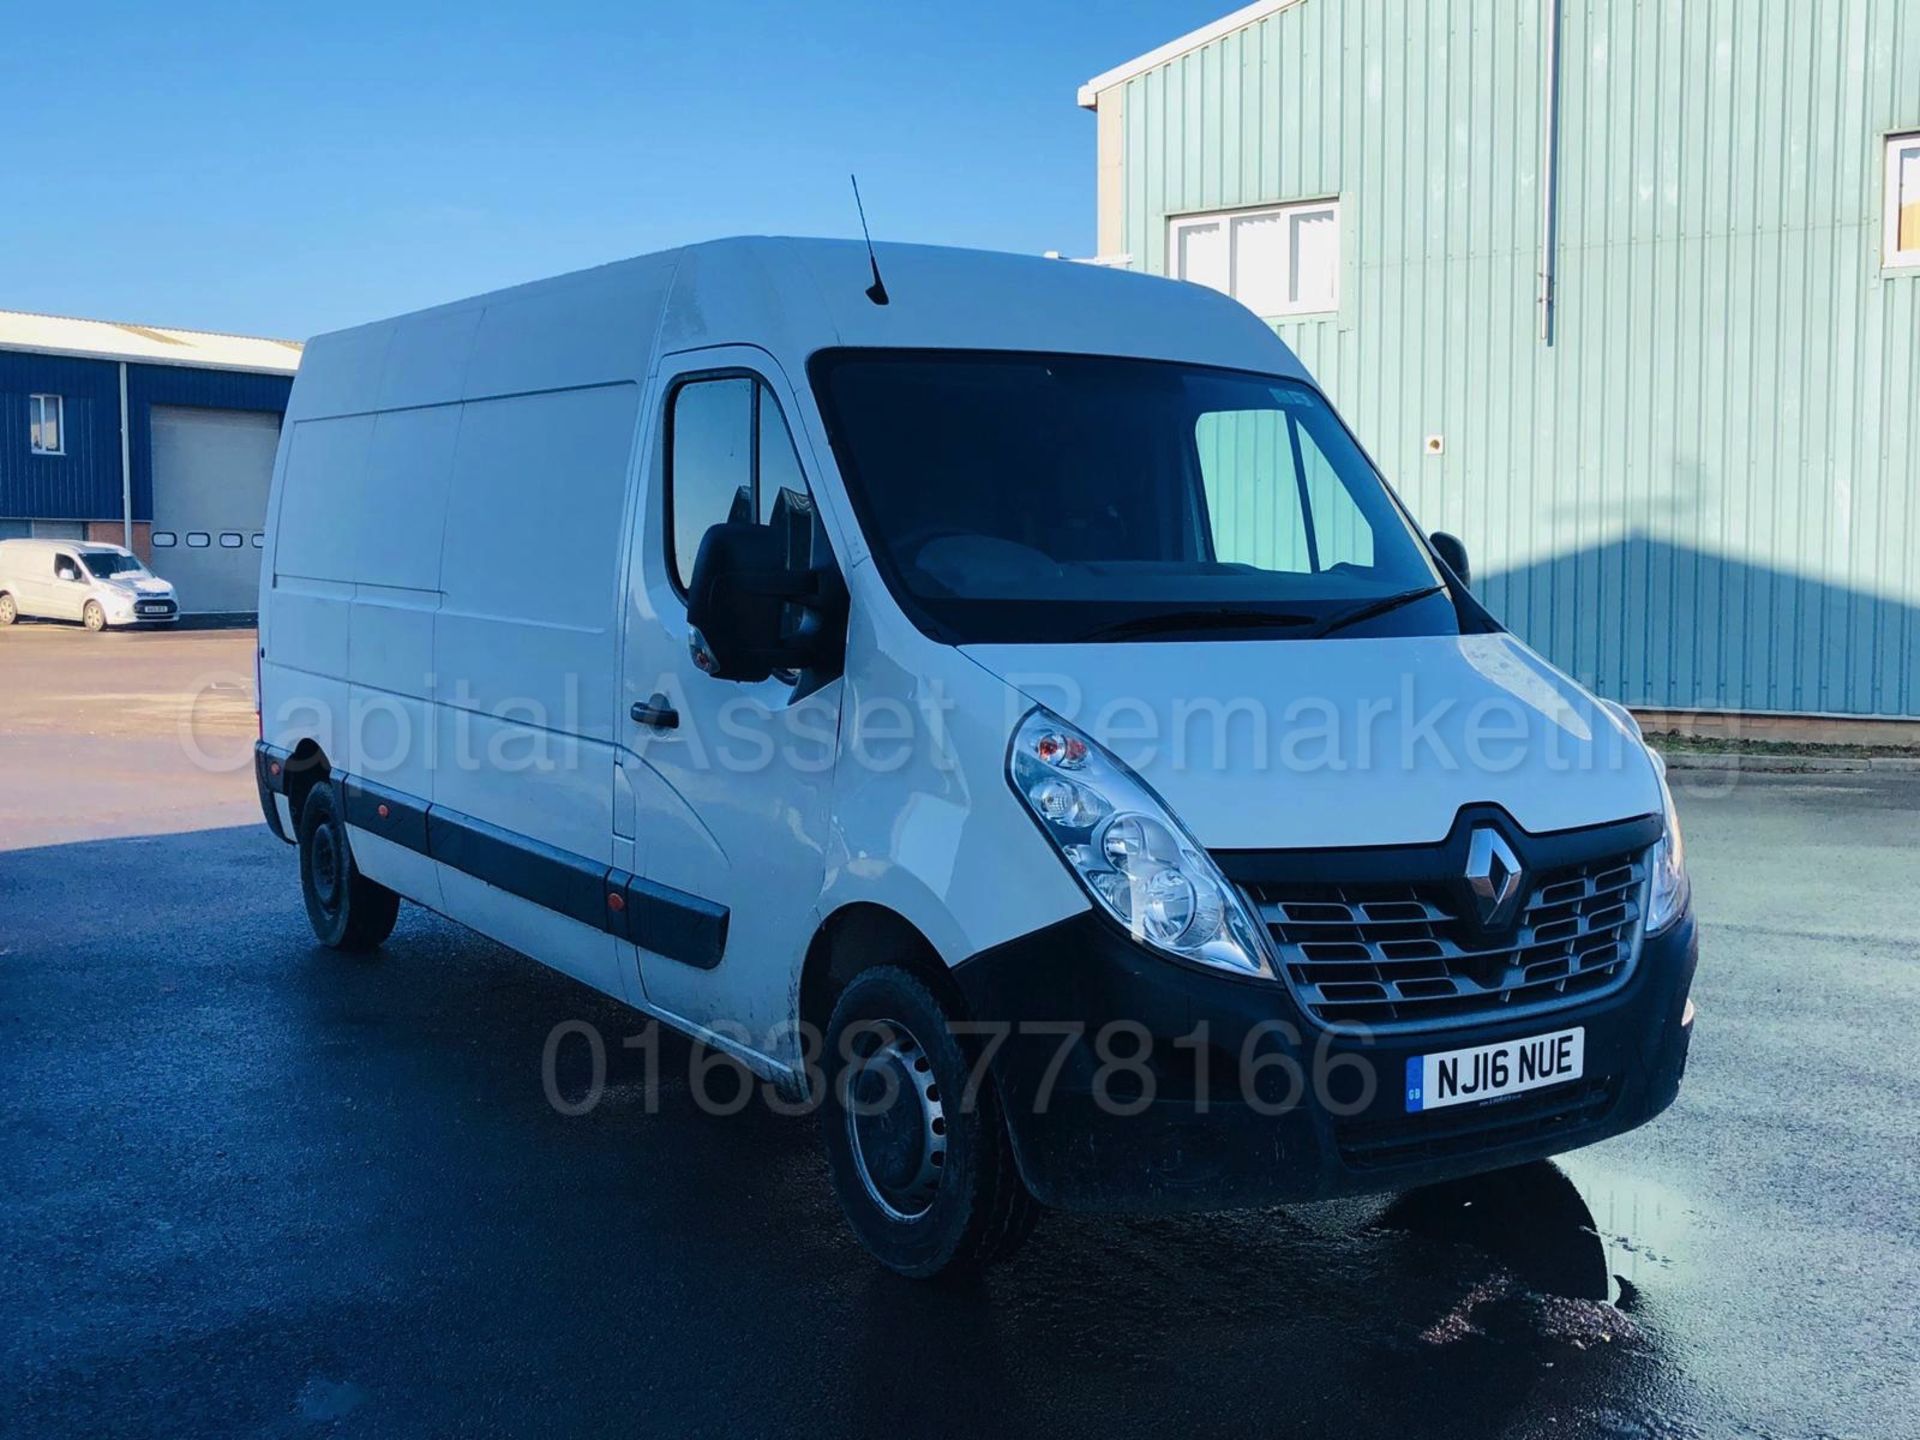 RENAULT MASTER LM35 *LWB - BUSINESS EDITION* (2016) '2.3 DCI - 110 BHP - 6 SPEED' *ULTRA LOW MILES*